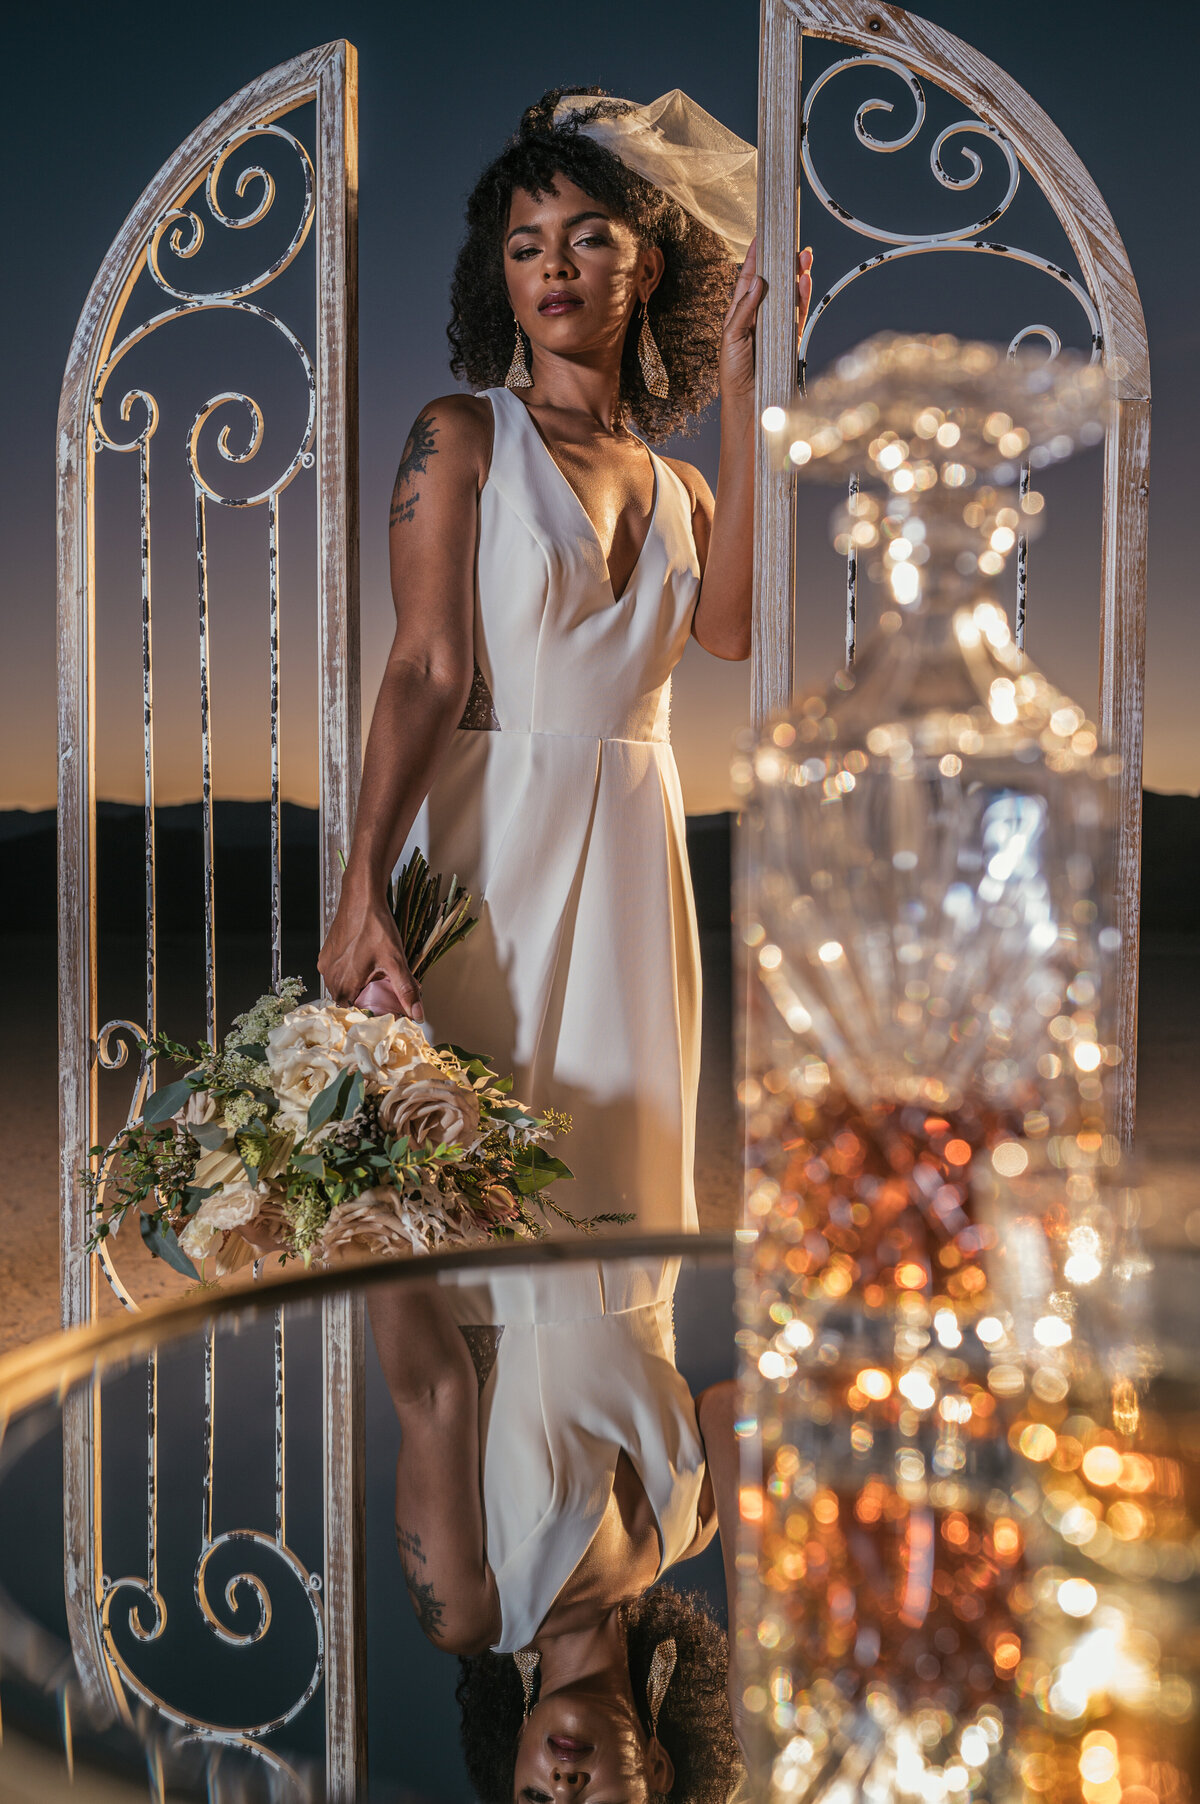 Mirrored table Whiskey decanter dry lake bed bride poc short veil reflection  flowers by michelle sunset golden hour mk delacy photography las vegas wedding photography  las vegas wedding photographers